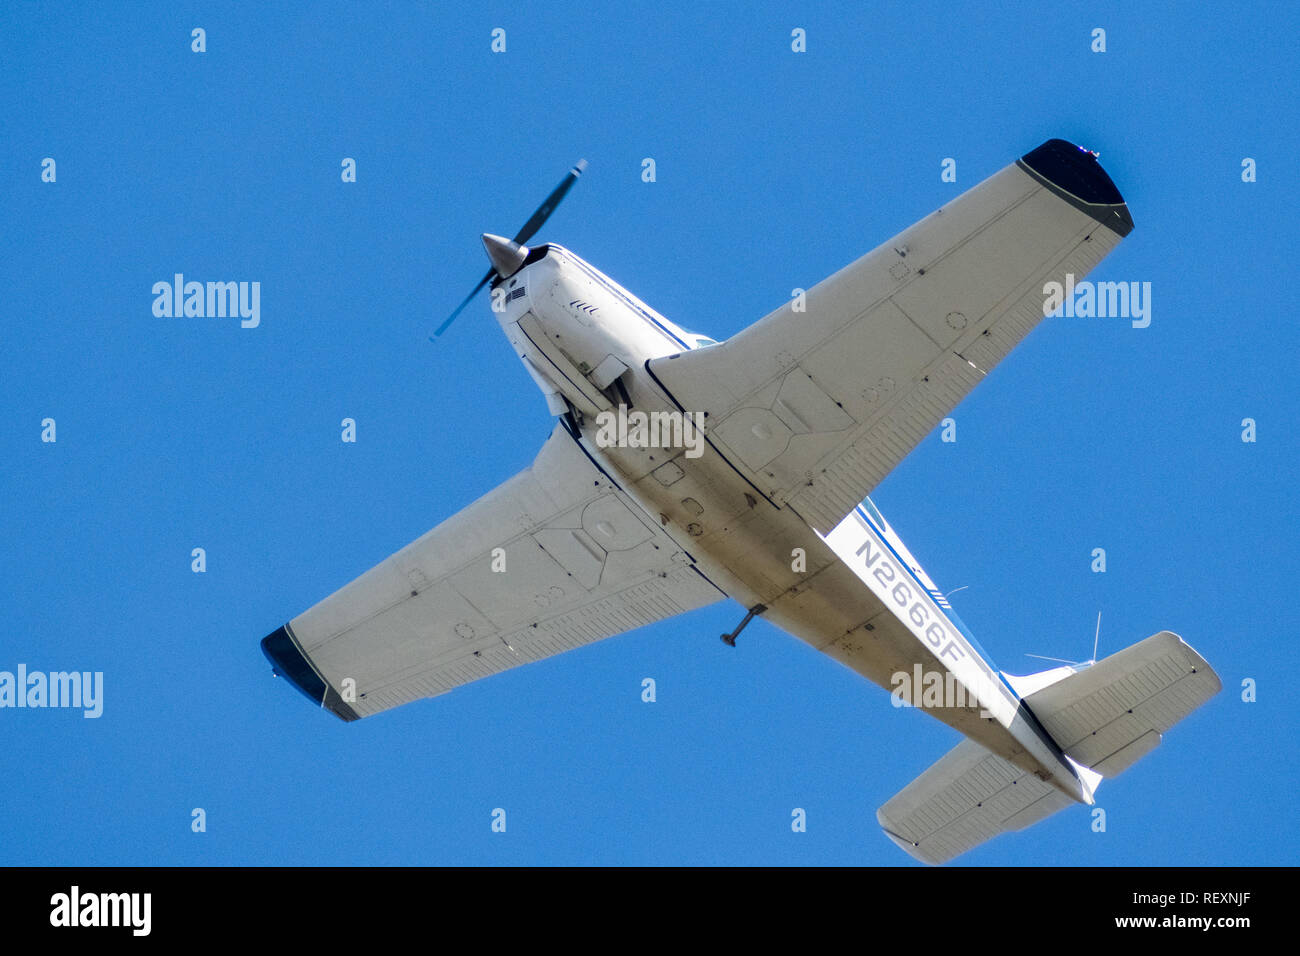 January 31, 2018 San Jose / CA / USA - Private airplane up in the air after taking off from Norman Y. Mineta San Jose International Airport, Silicon V Stock Photo